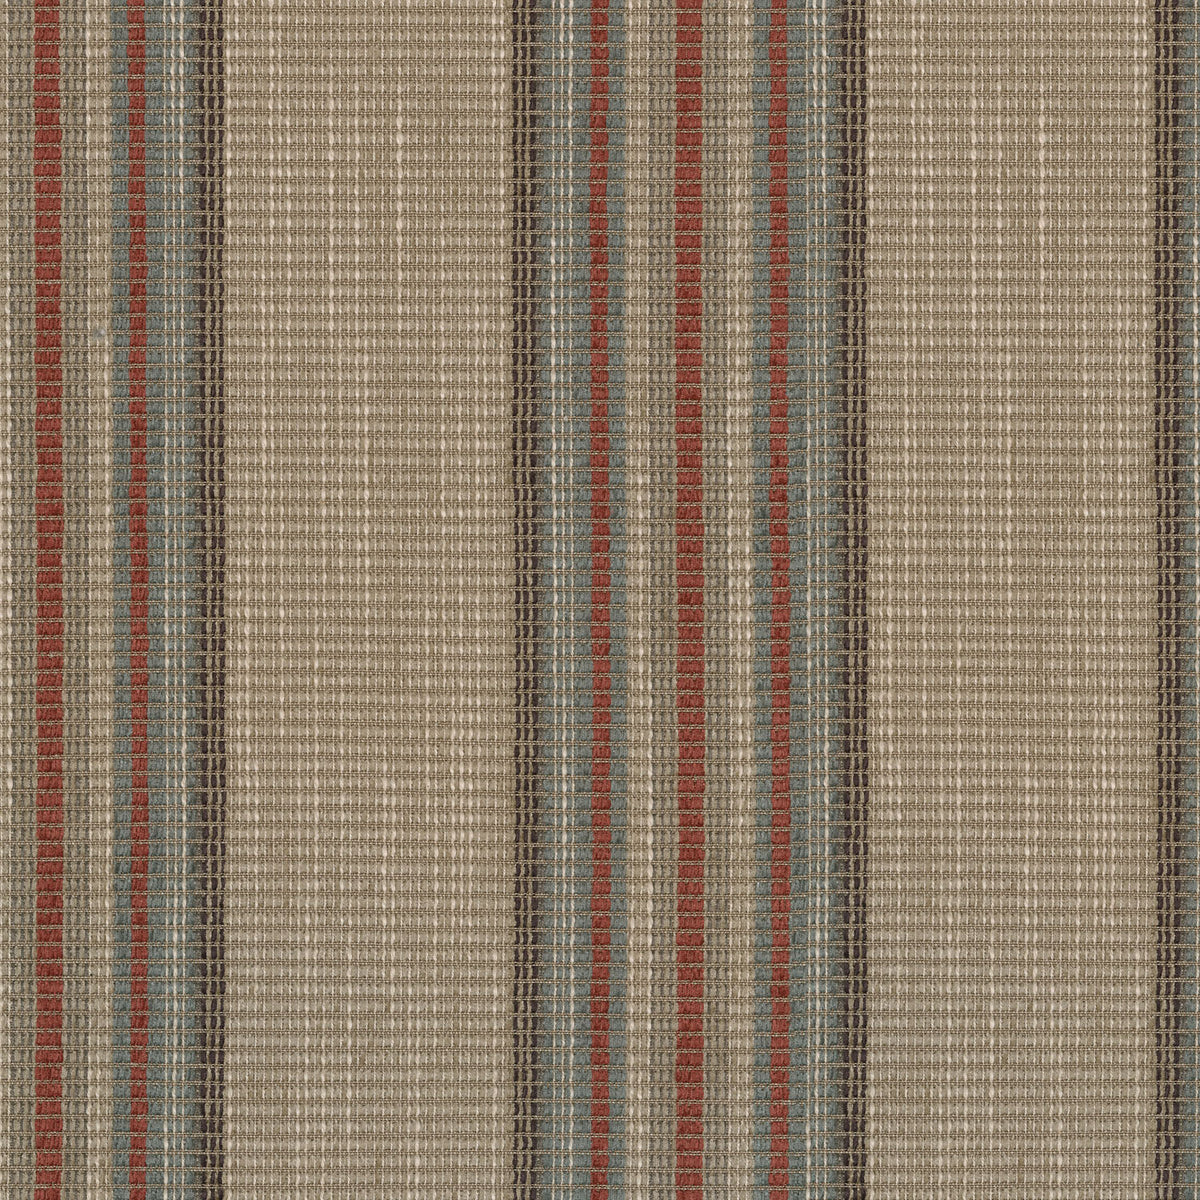 Waverly Crossing Paths - Old Glory 654553 Upholstery Fabric